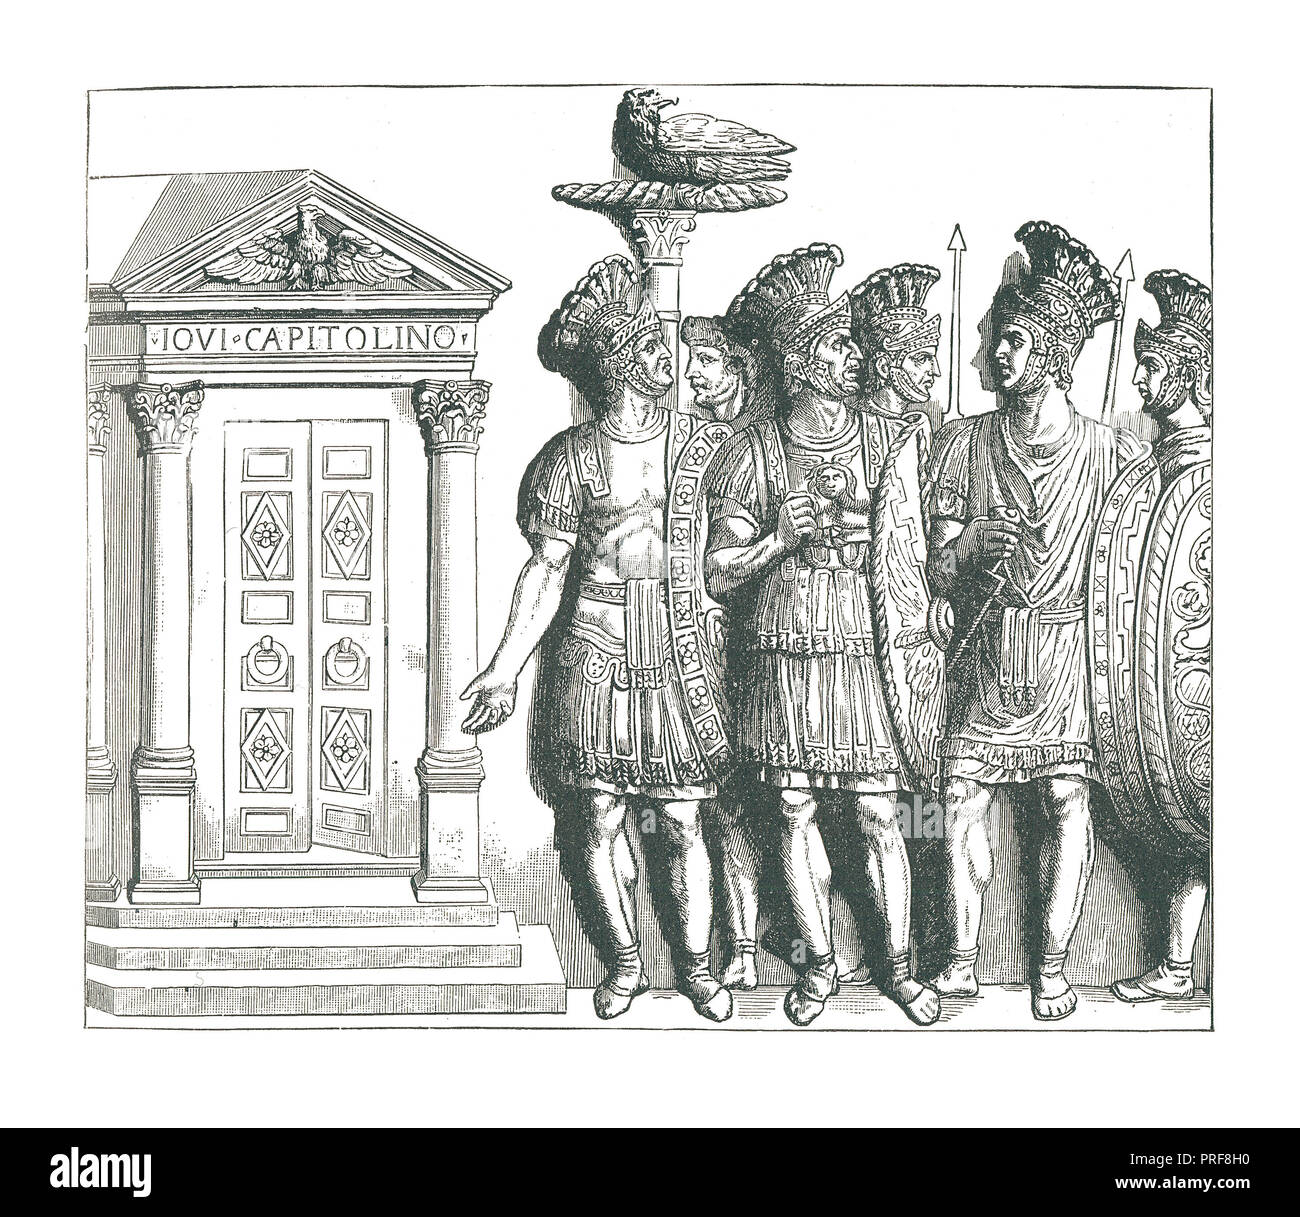 Original artwork of Pretorians, a force of bodyguards used by Roman Emperors. Published in A pictorial history of the world's great nations: from the  Stock Photo